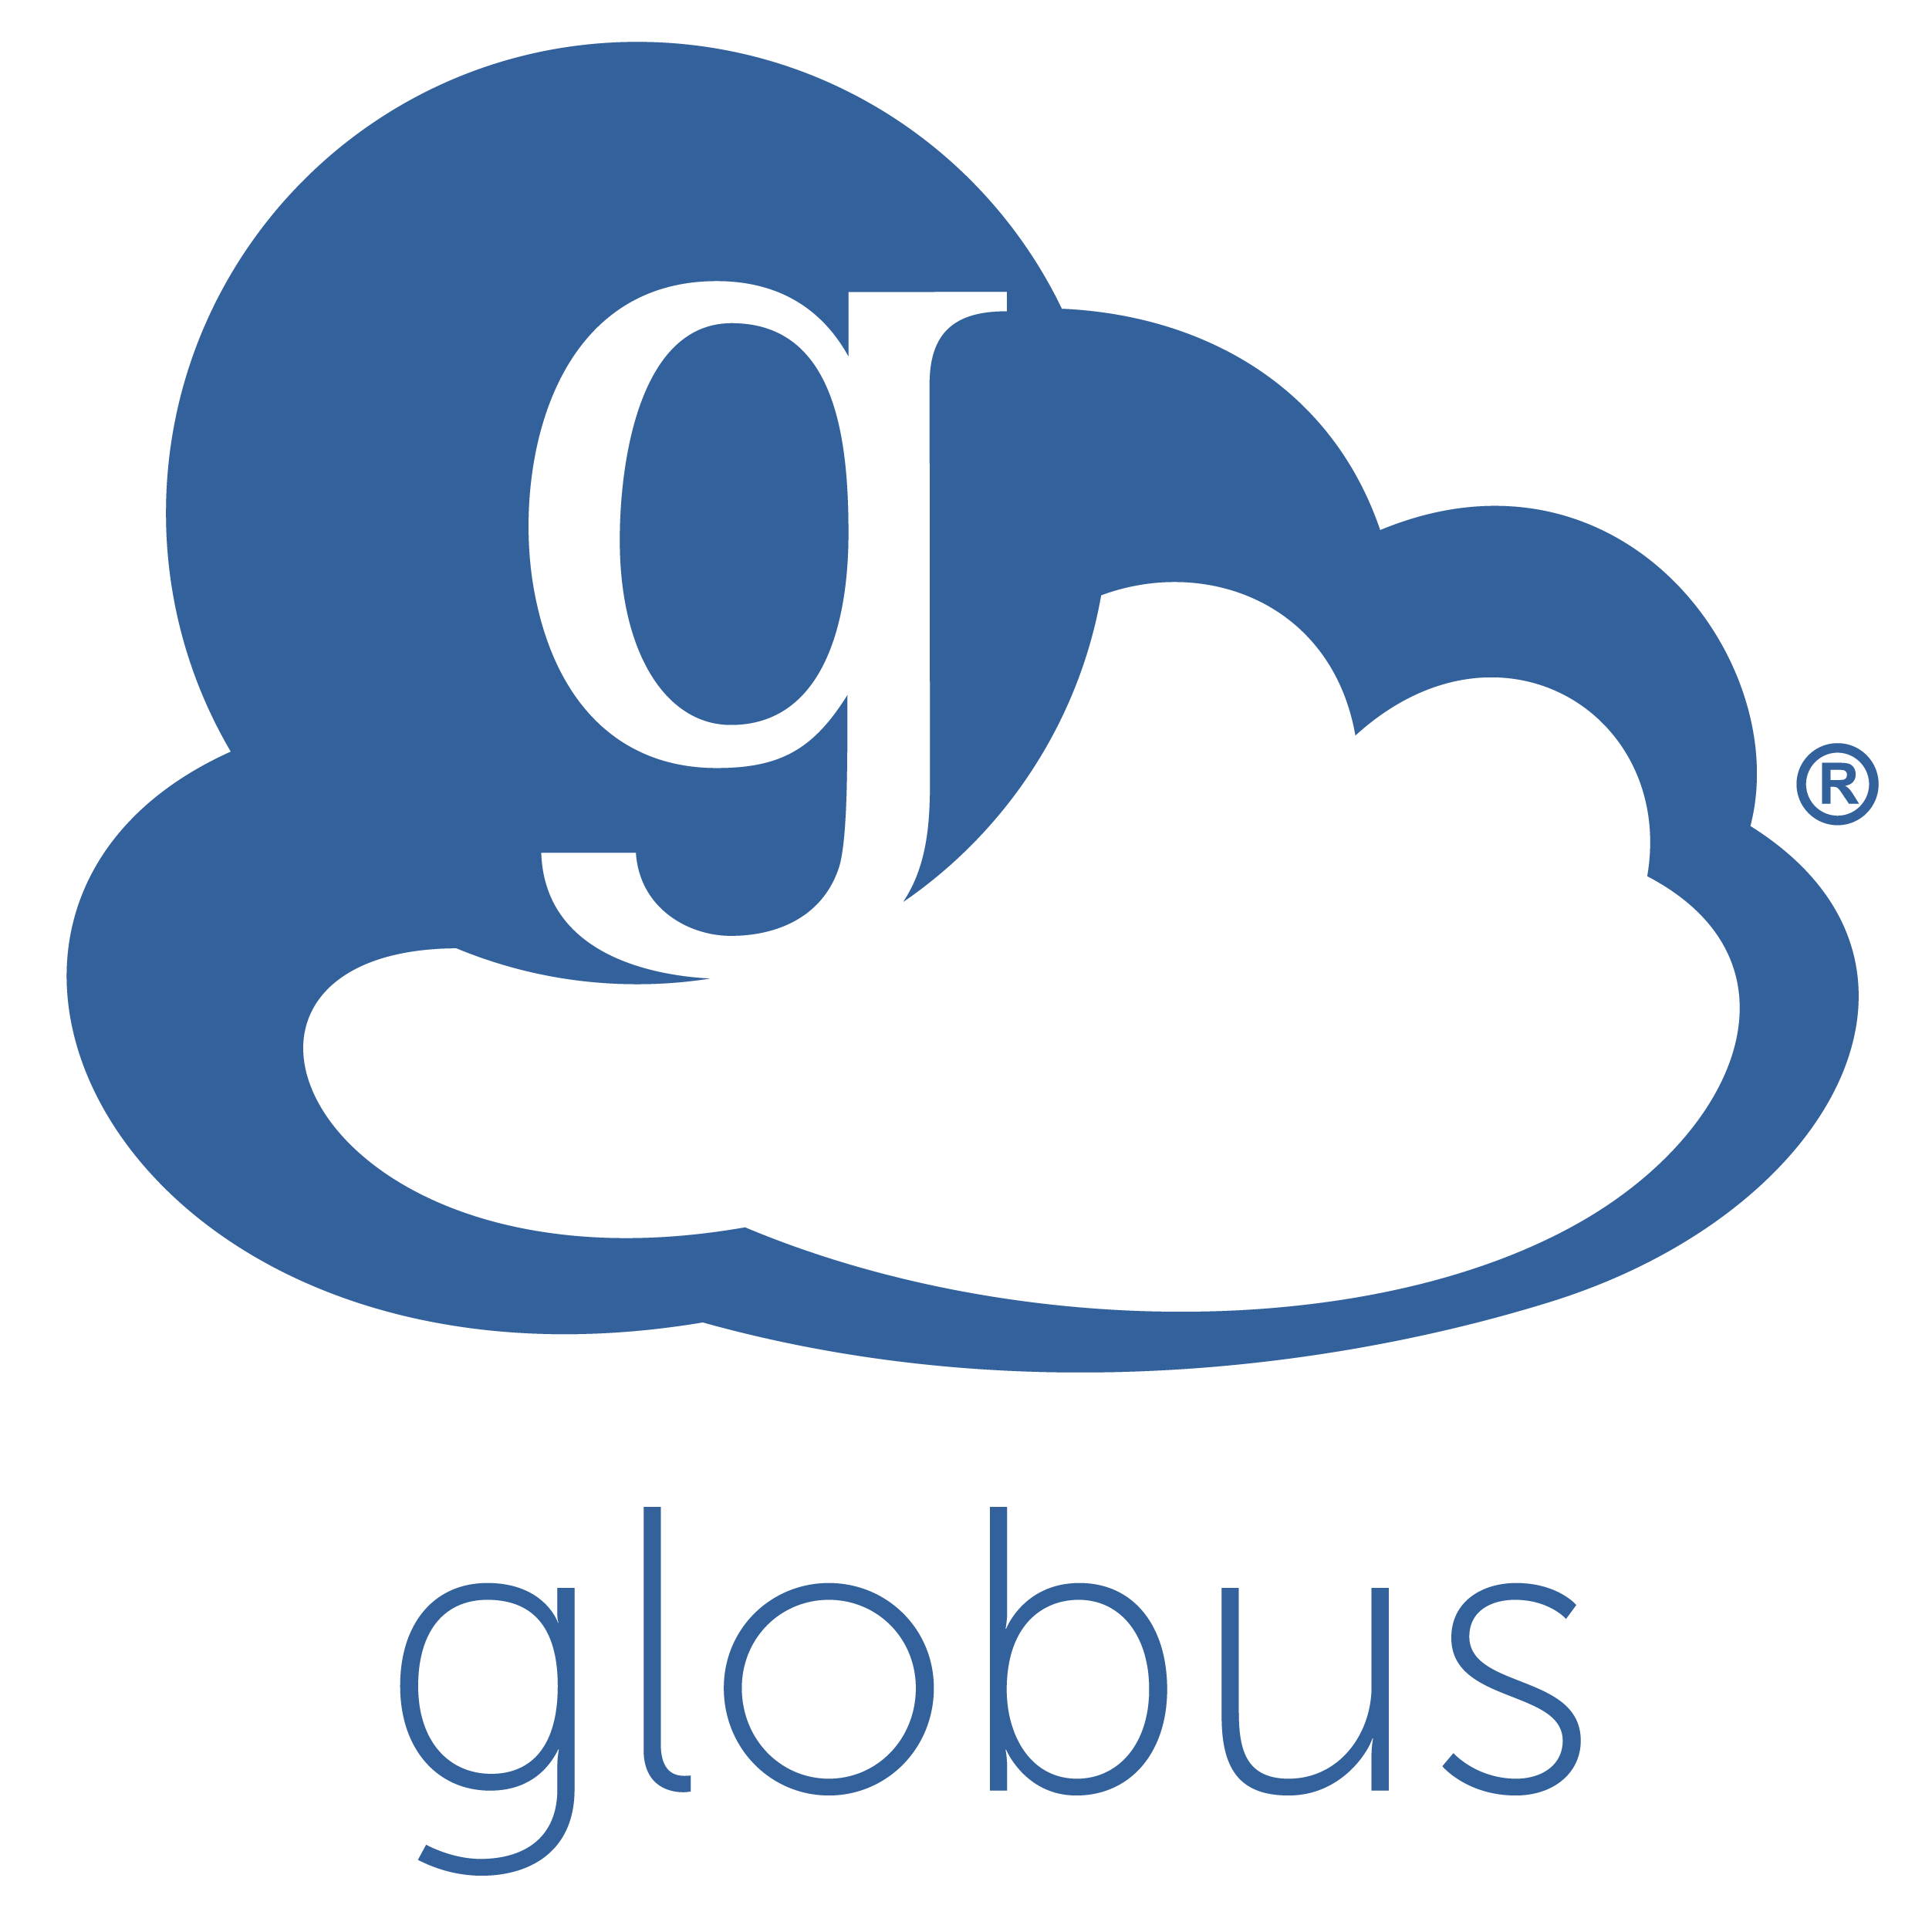 Globus is a leading provider of research data management software application and platform services.